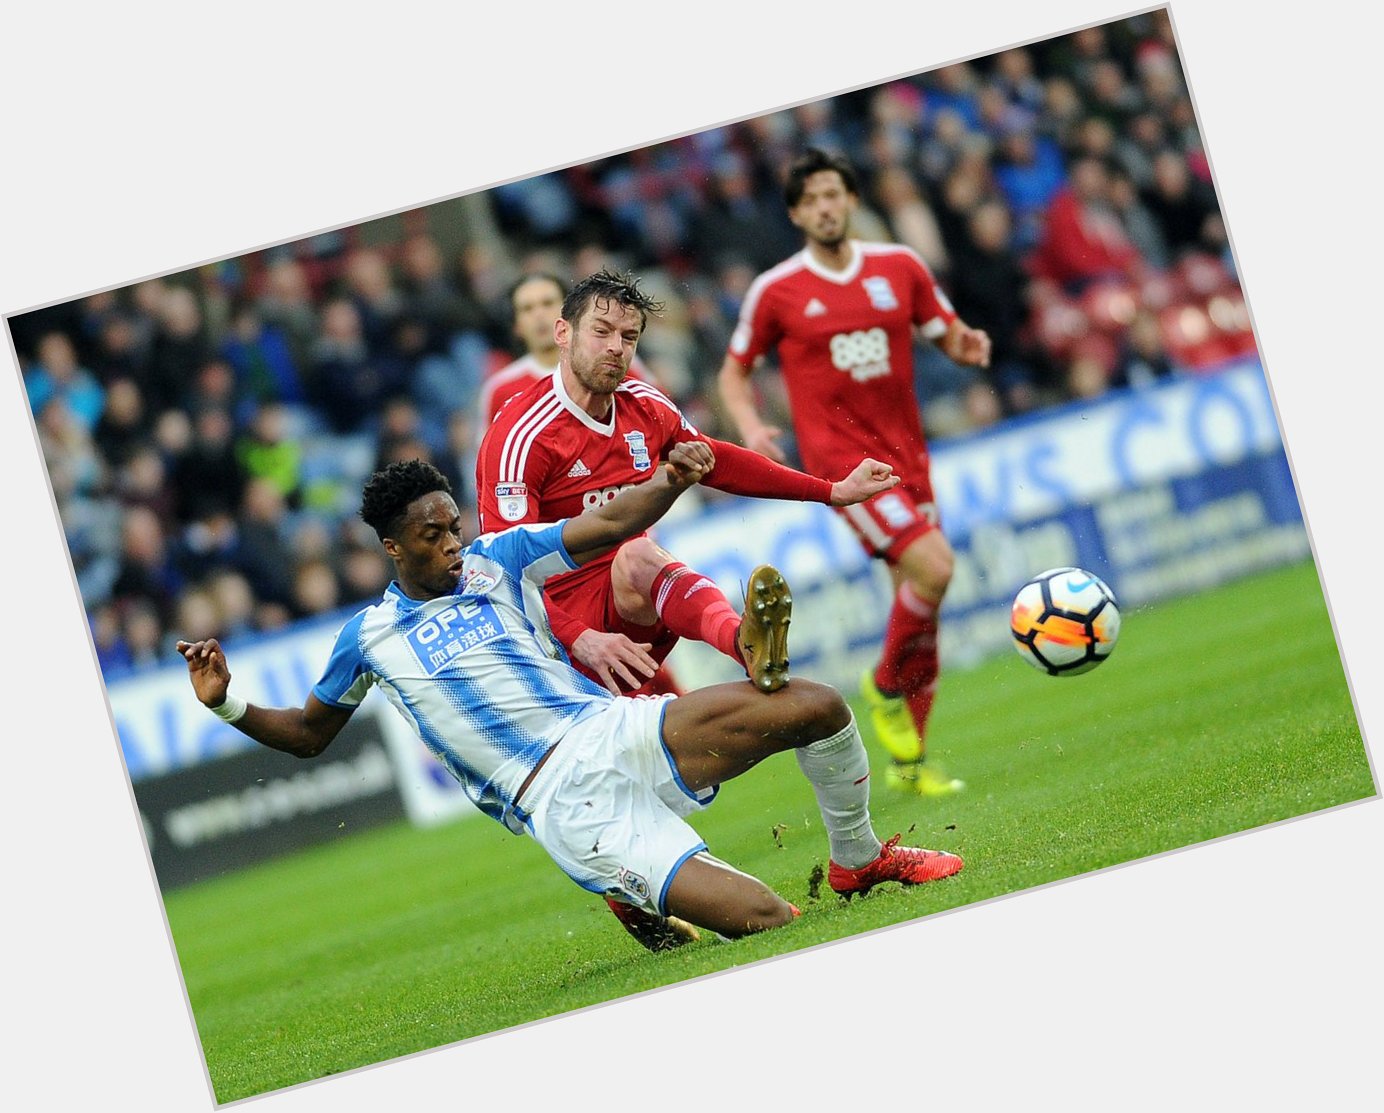 Happy birthday to Huddersfield Town defender Terence Kongolo who turns 24 today! 